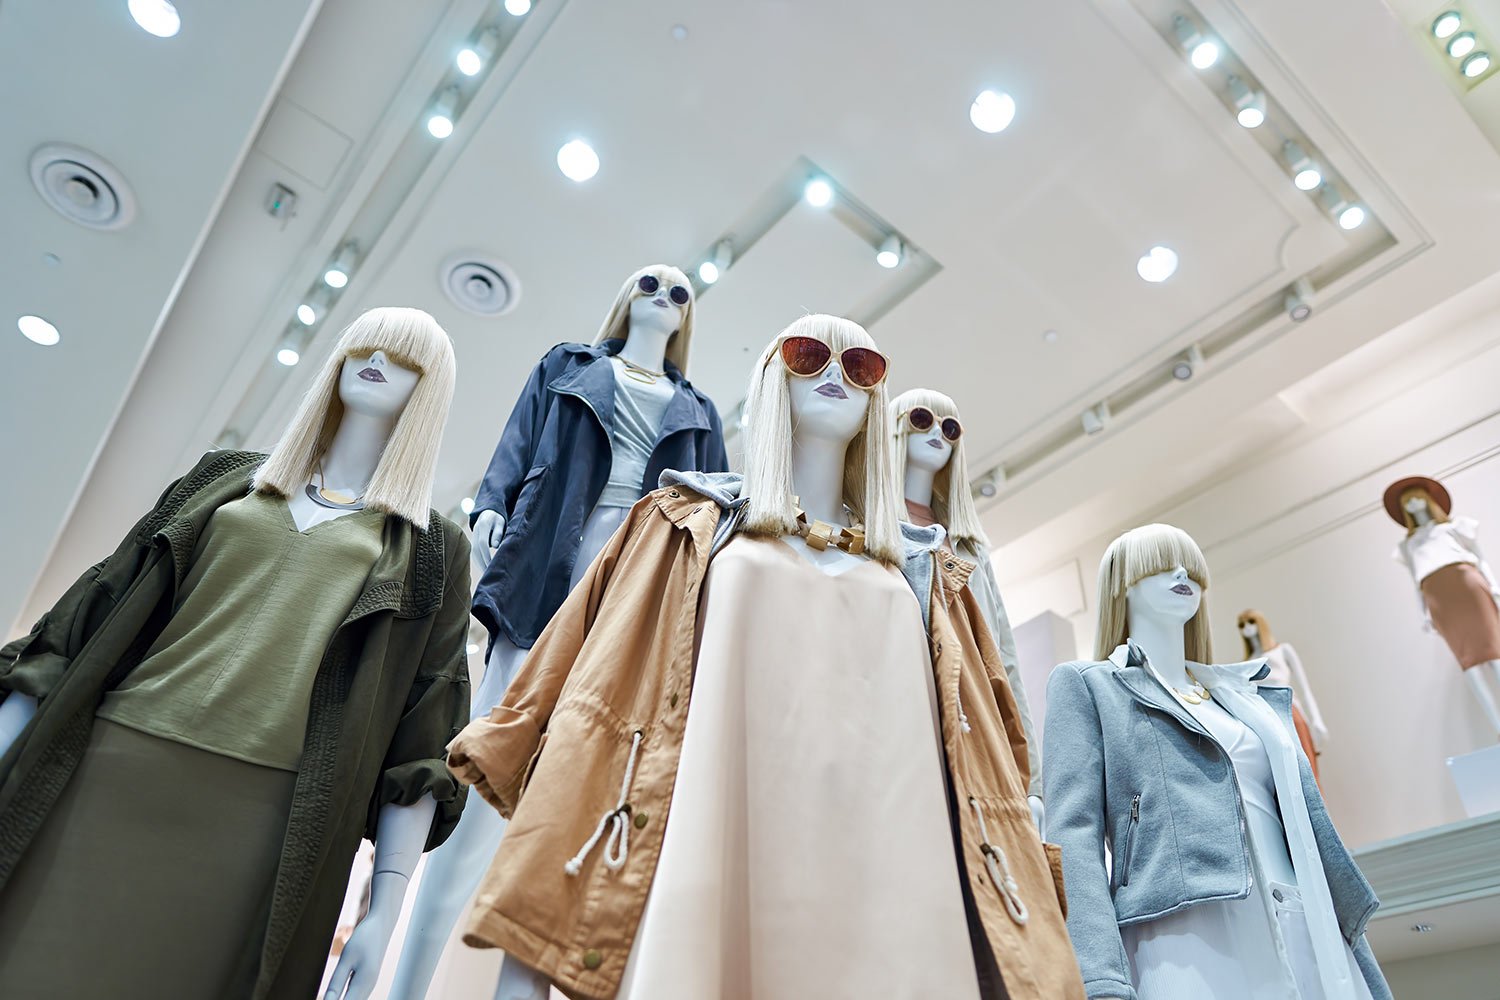 Can we enjoy fast fashion brands without destroying the planet?